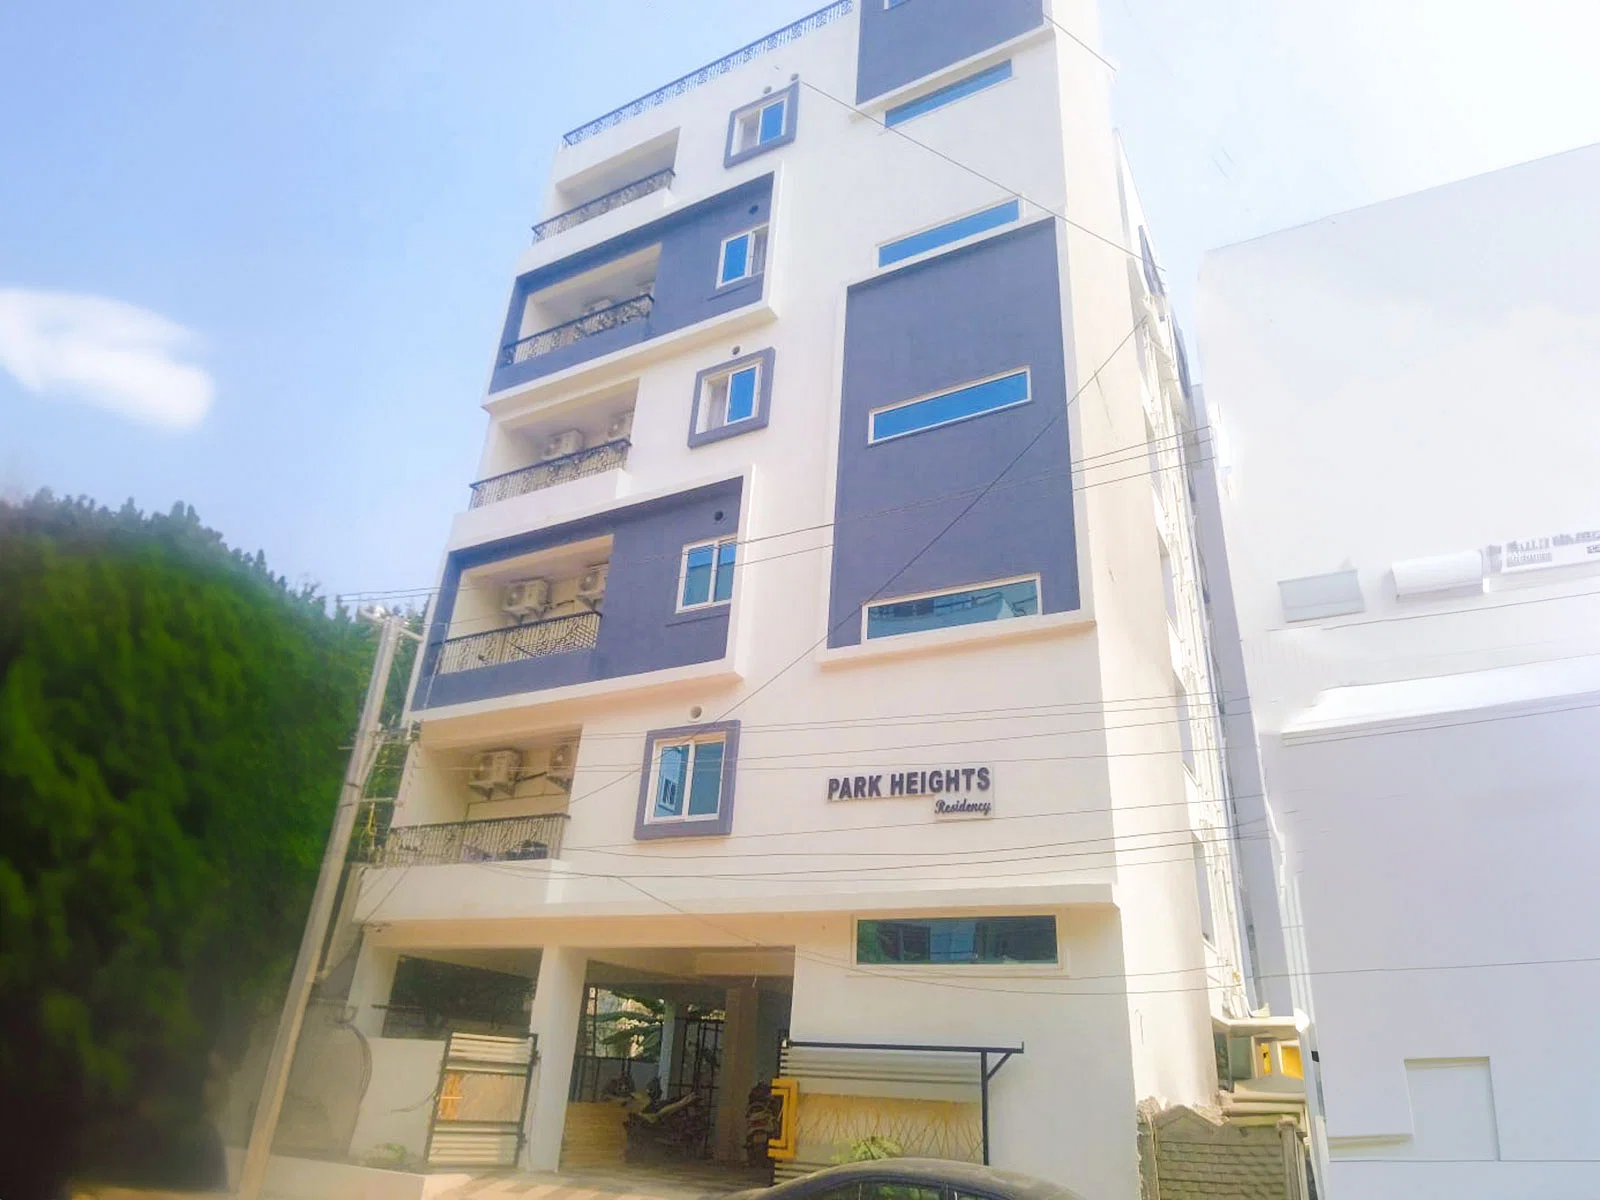 fully furnished Zolo single rooms for rent near me-check out now-Zolo Park Heights